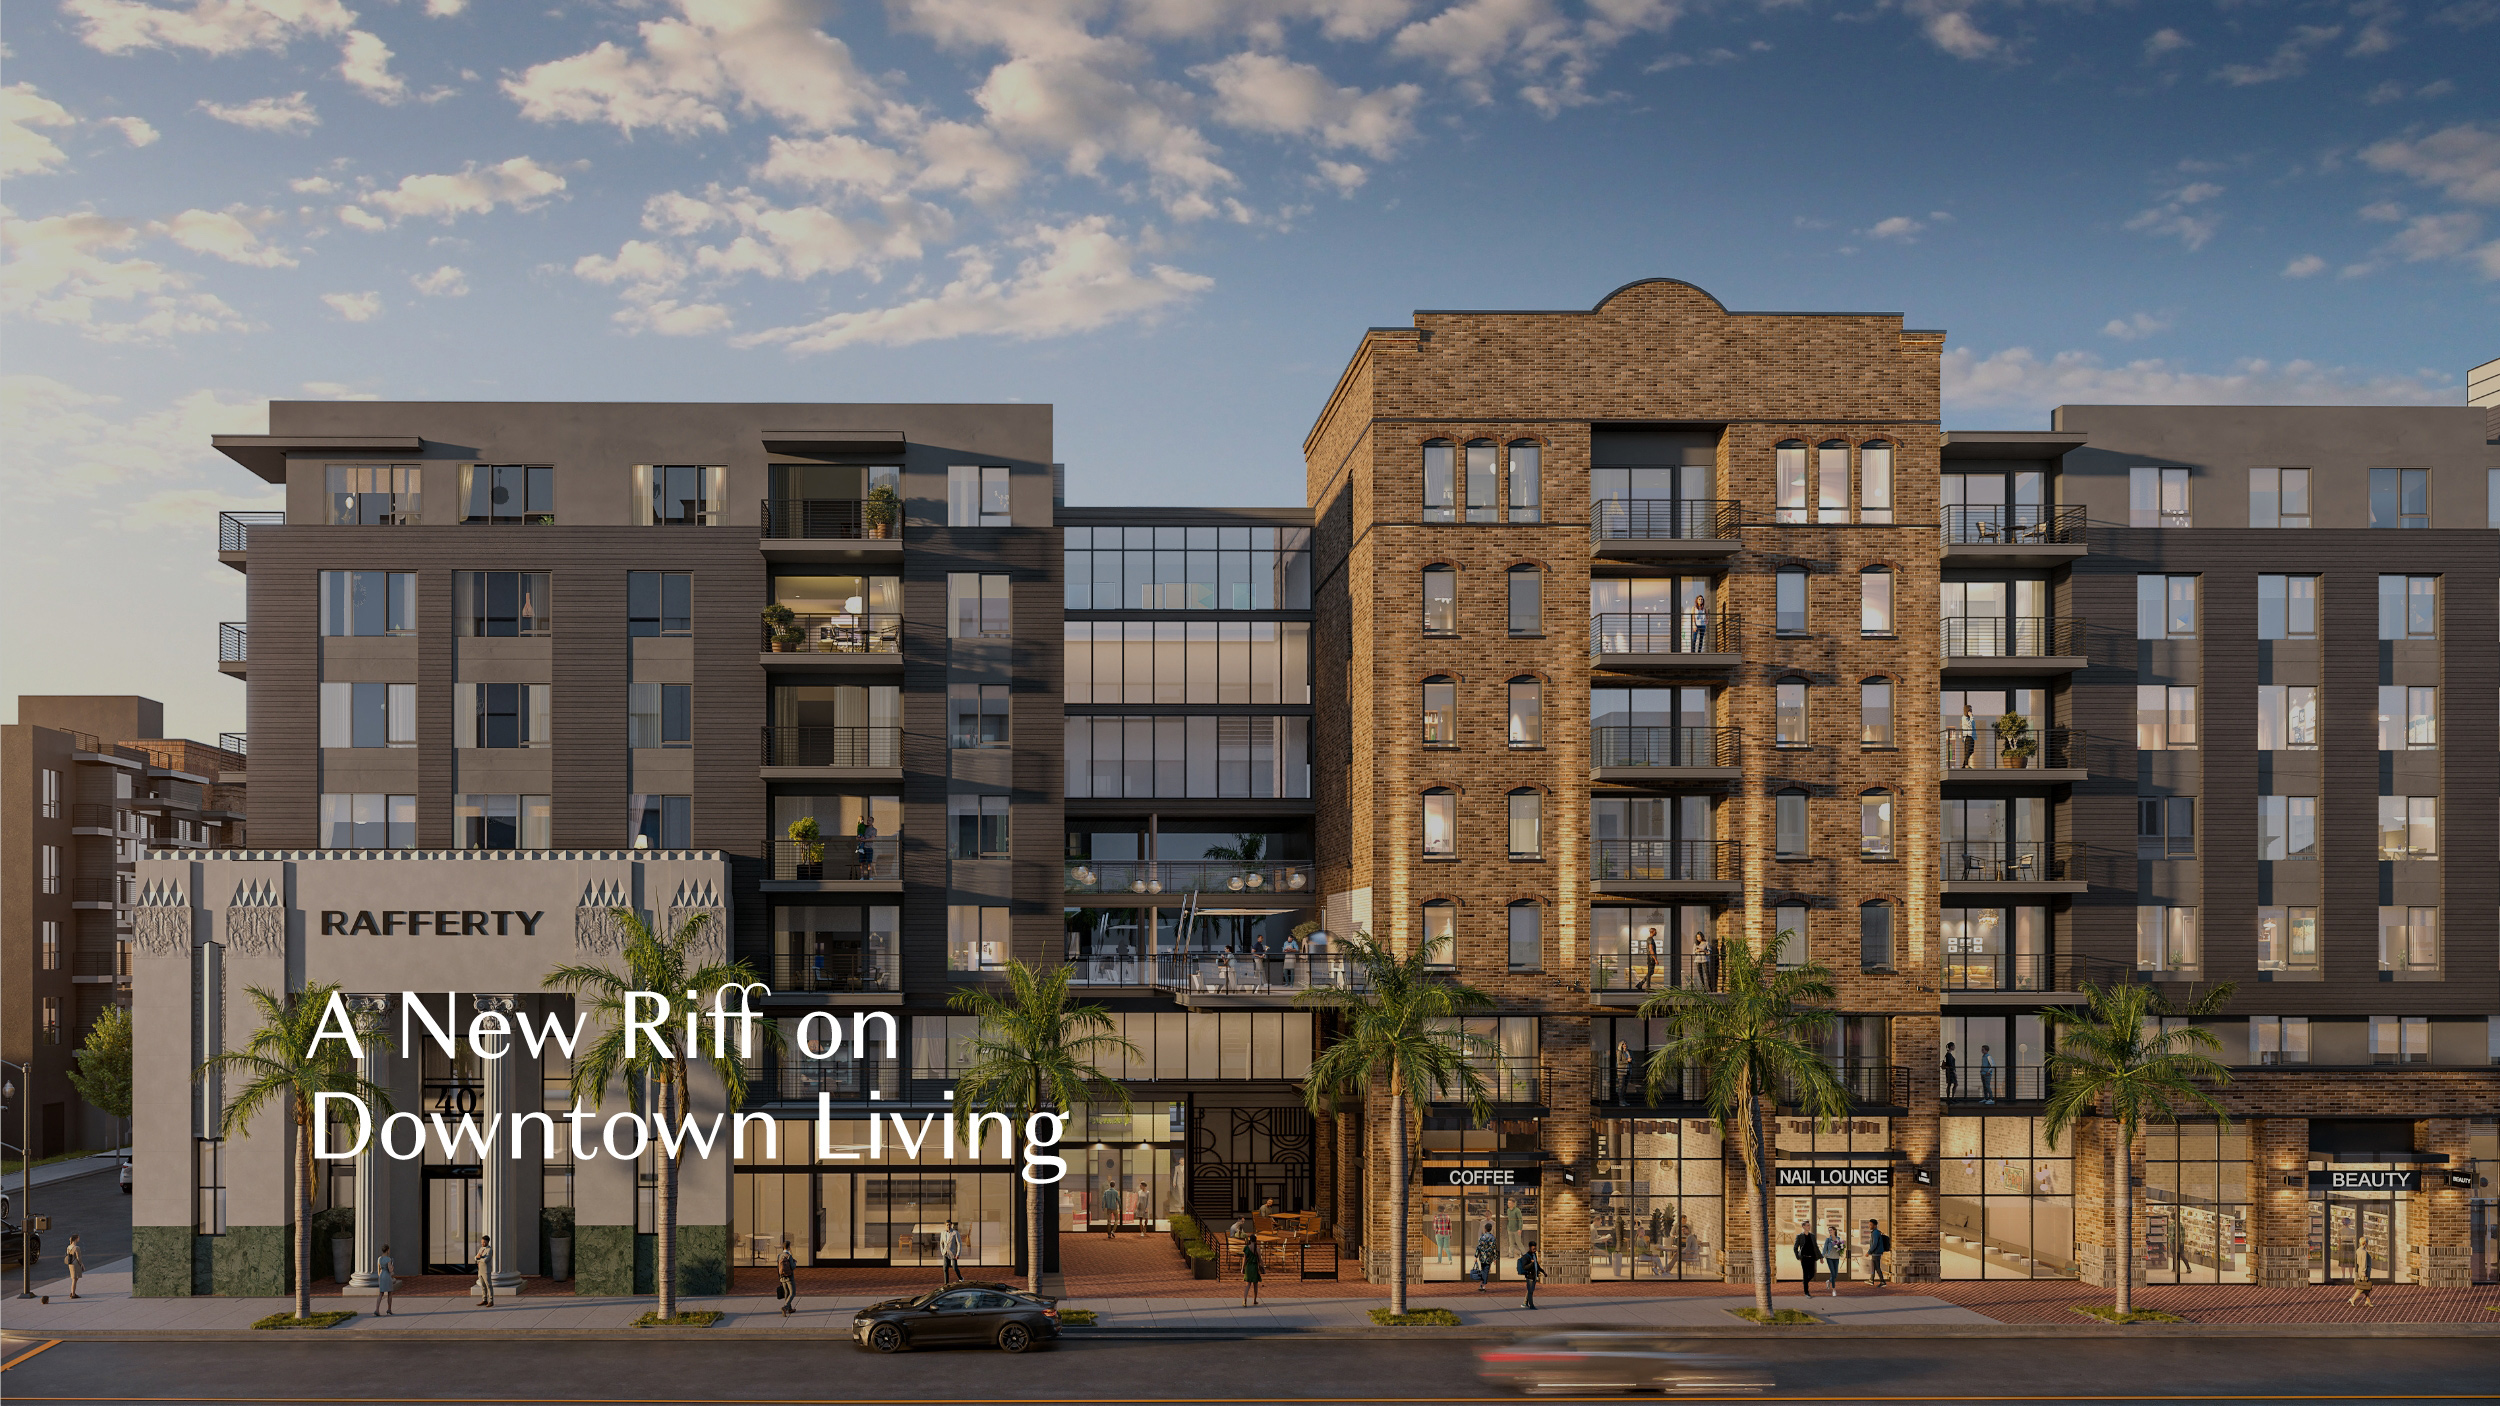 Rafferty exterior. Text: A New Riff on Downtown Living.